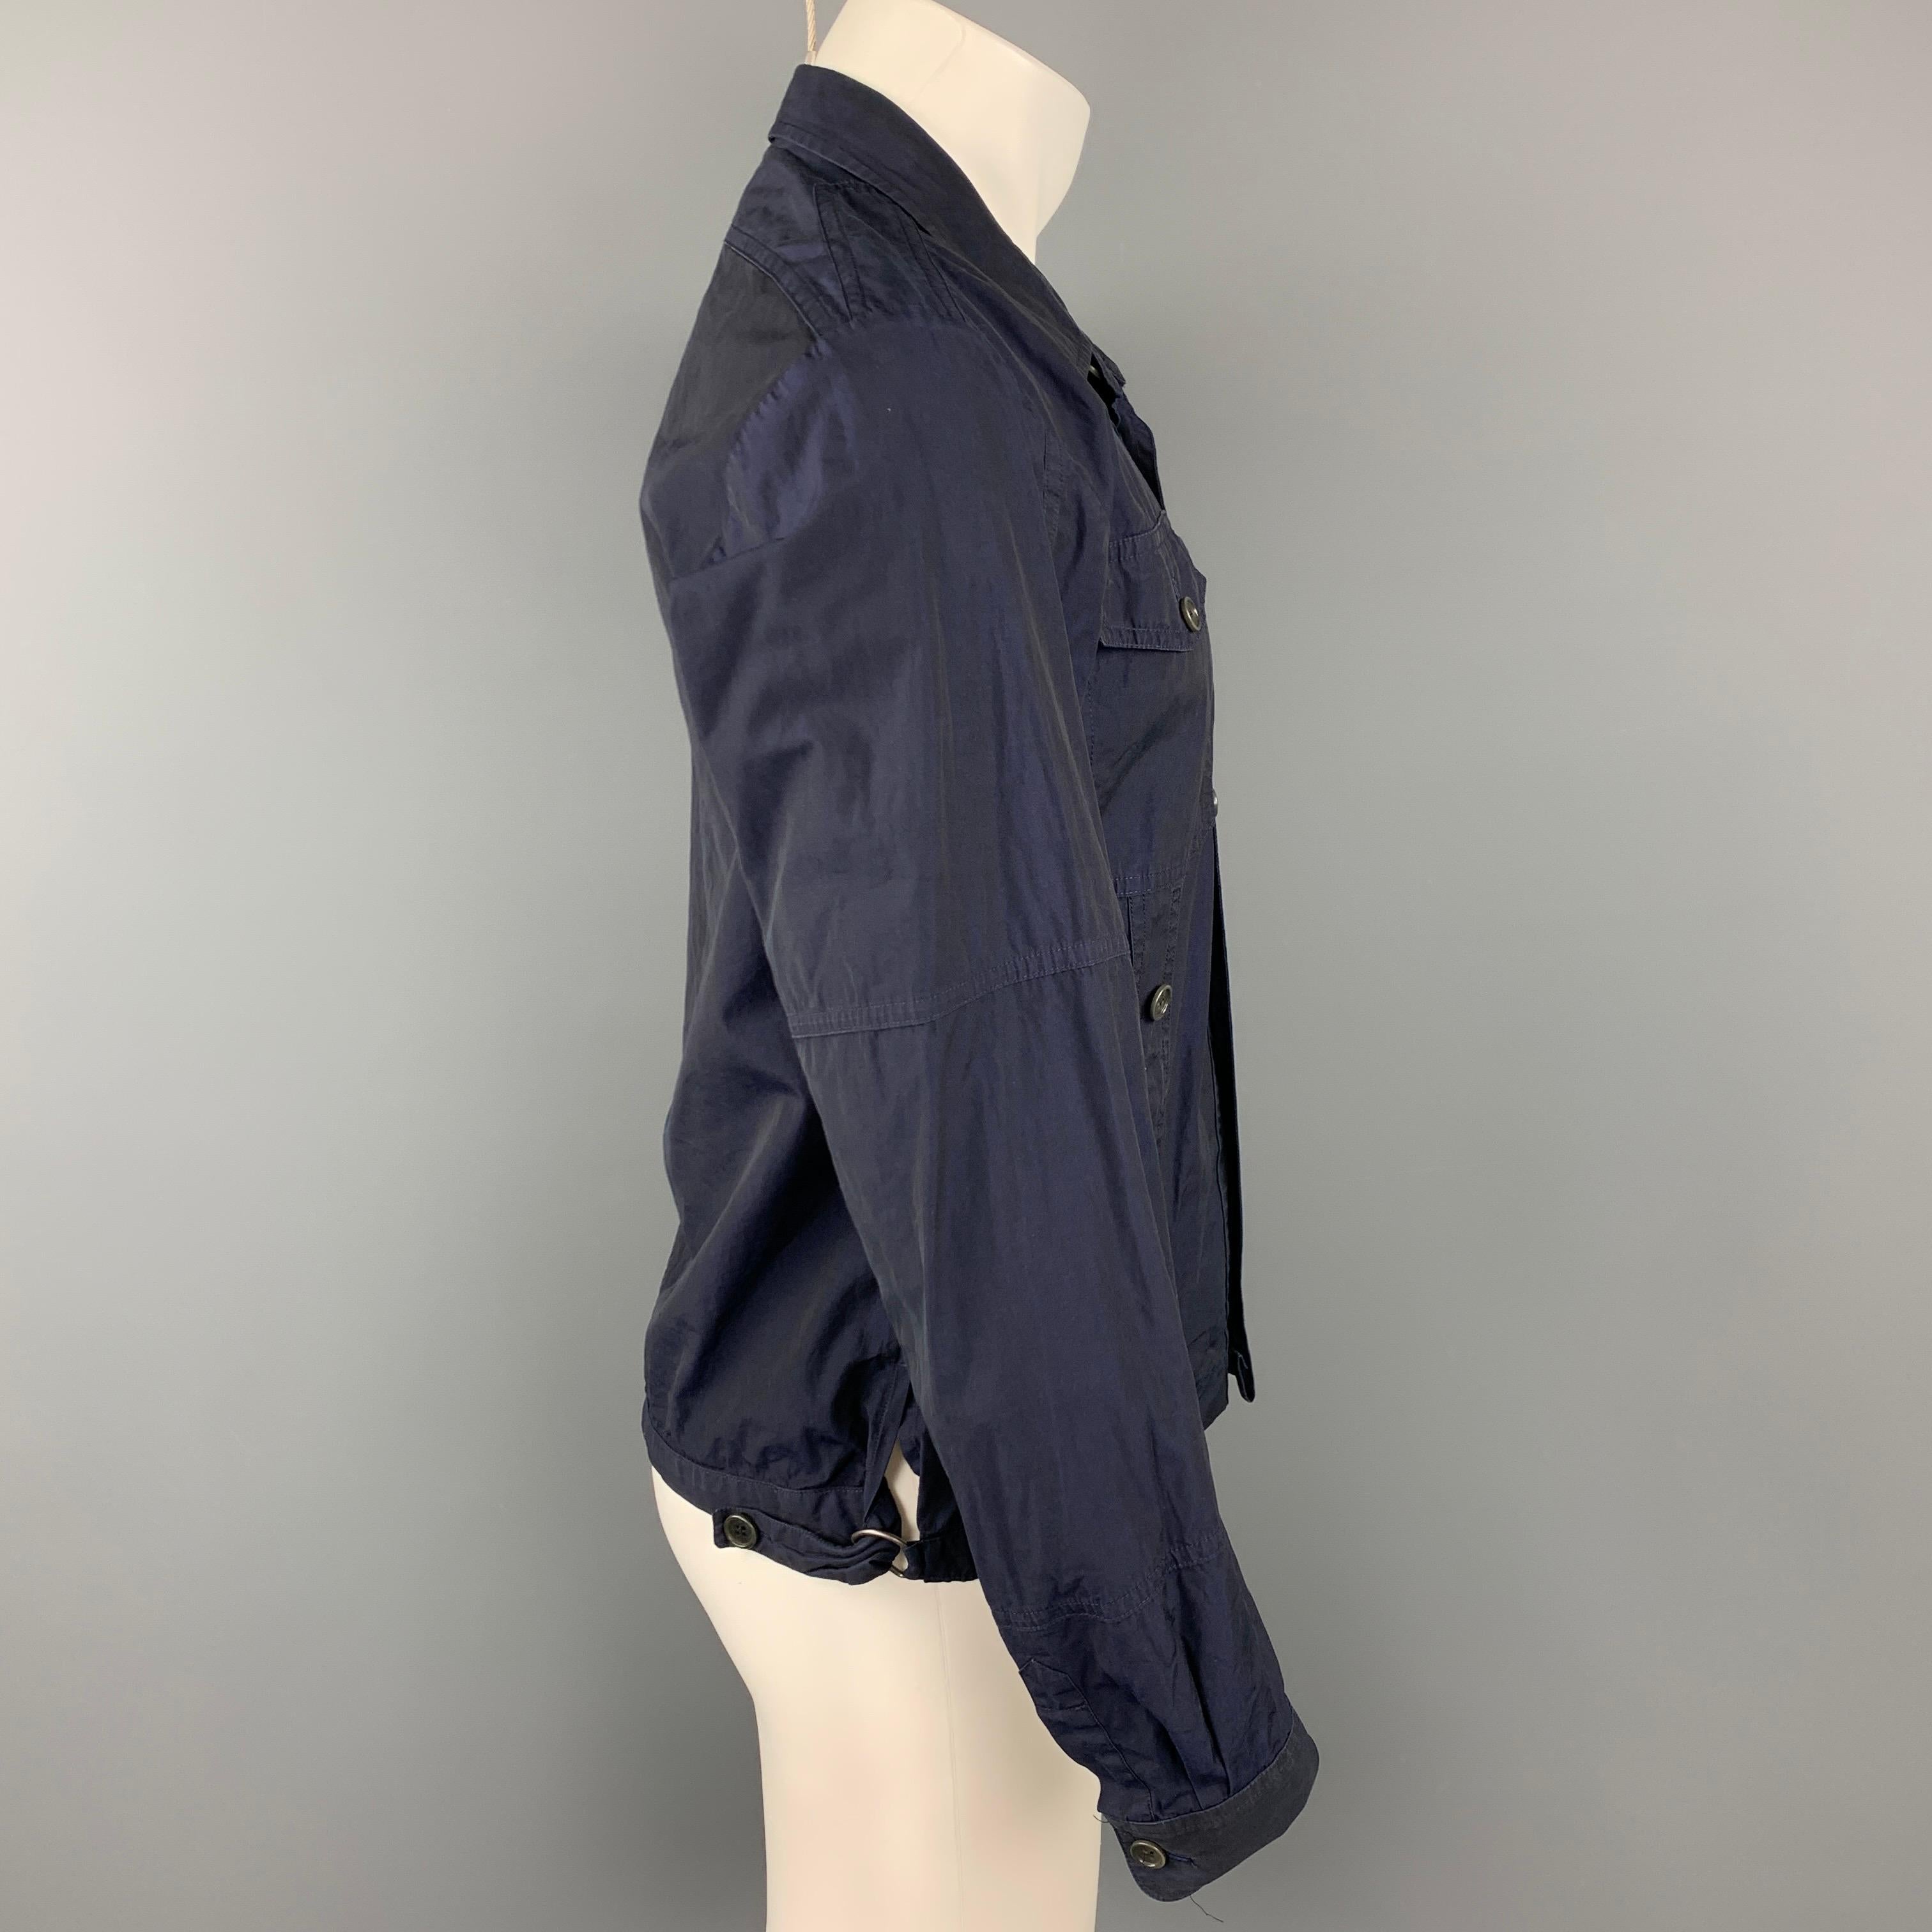 DRIES VAN NOTEN jacket comes in a navy cotton featuring a trucker style, patch pockets, spread collar, and a buttoned closure. Made in Romania.

Good Pre-Owned Condition.
Marked: 50

Measurements:

Shoulder: 17.5 in.
Chest: 40 in.
Sleeve: 26.5